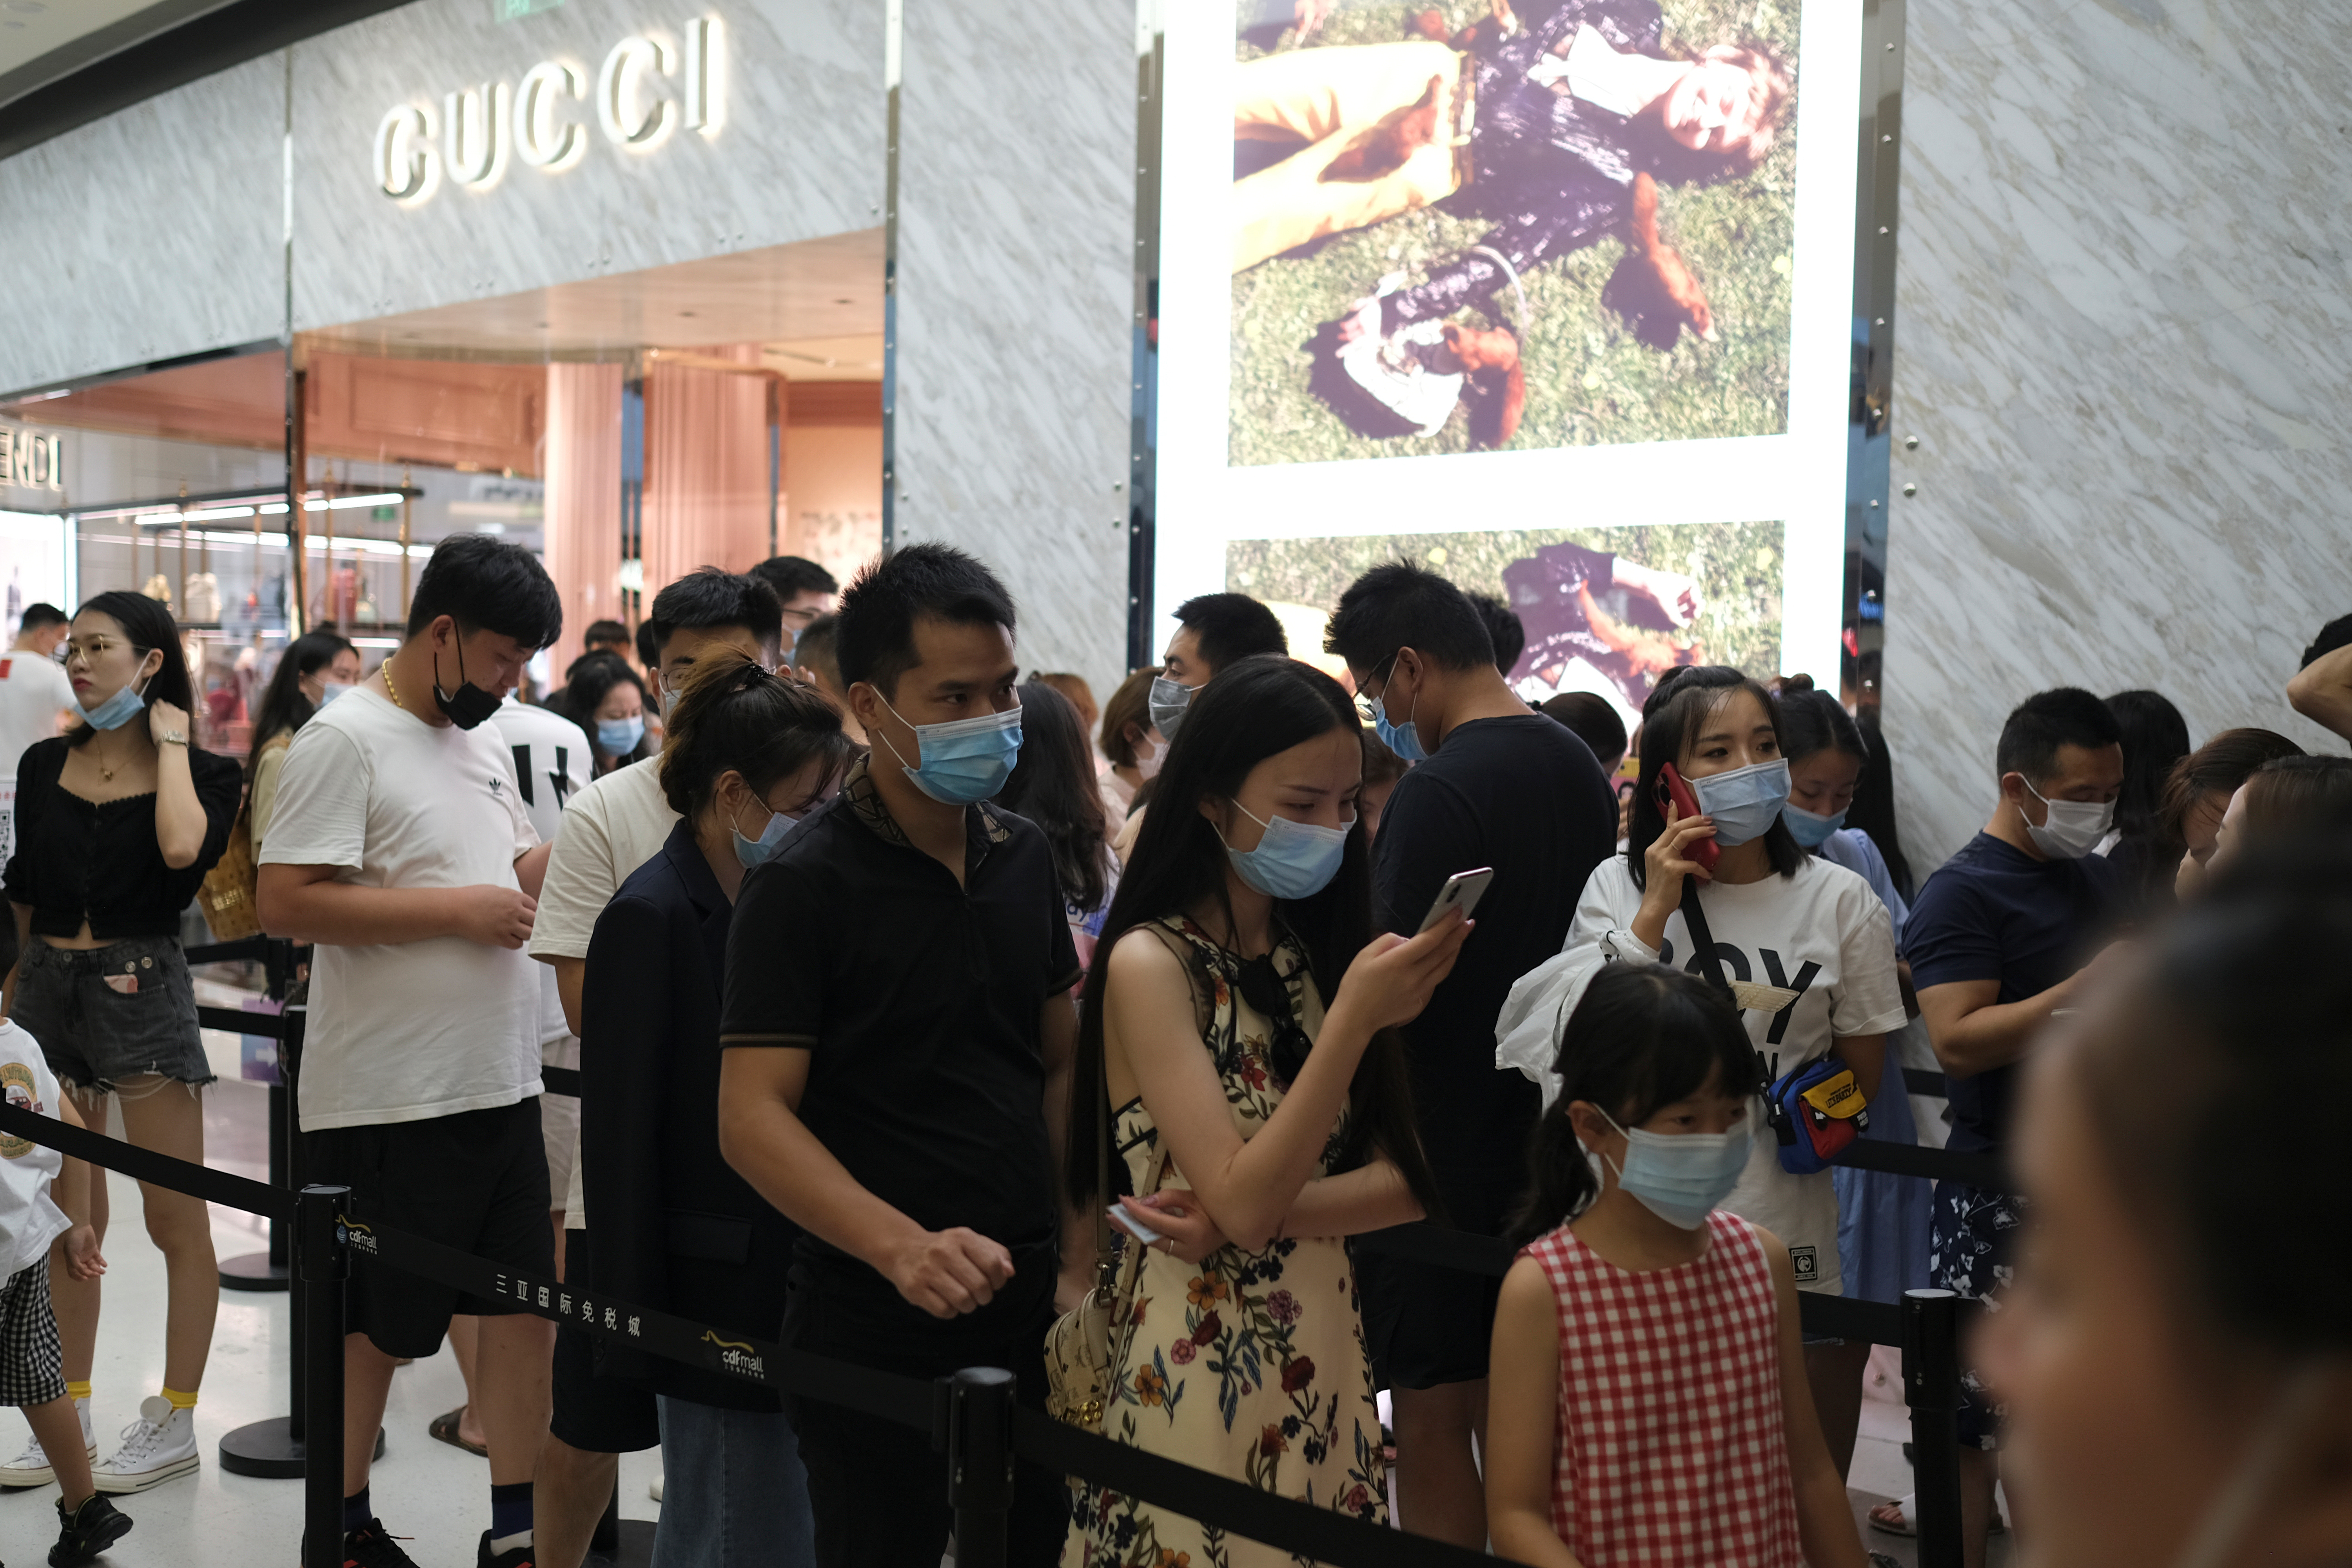 Chinese Shoppers Line Up for Louis Vuitton After Price Hike